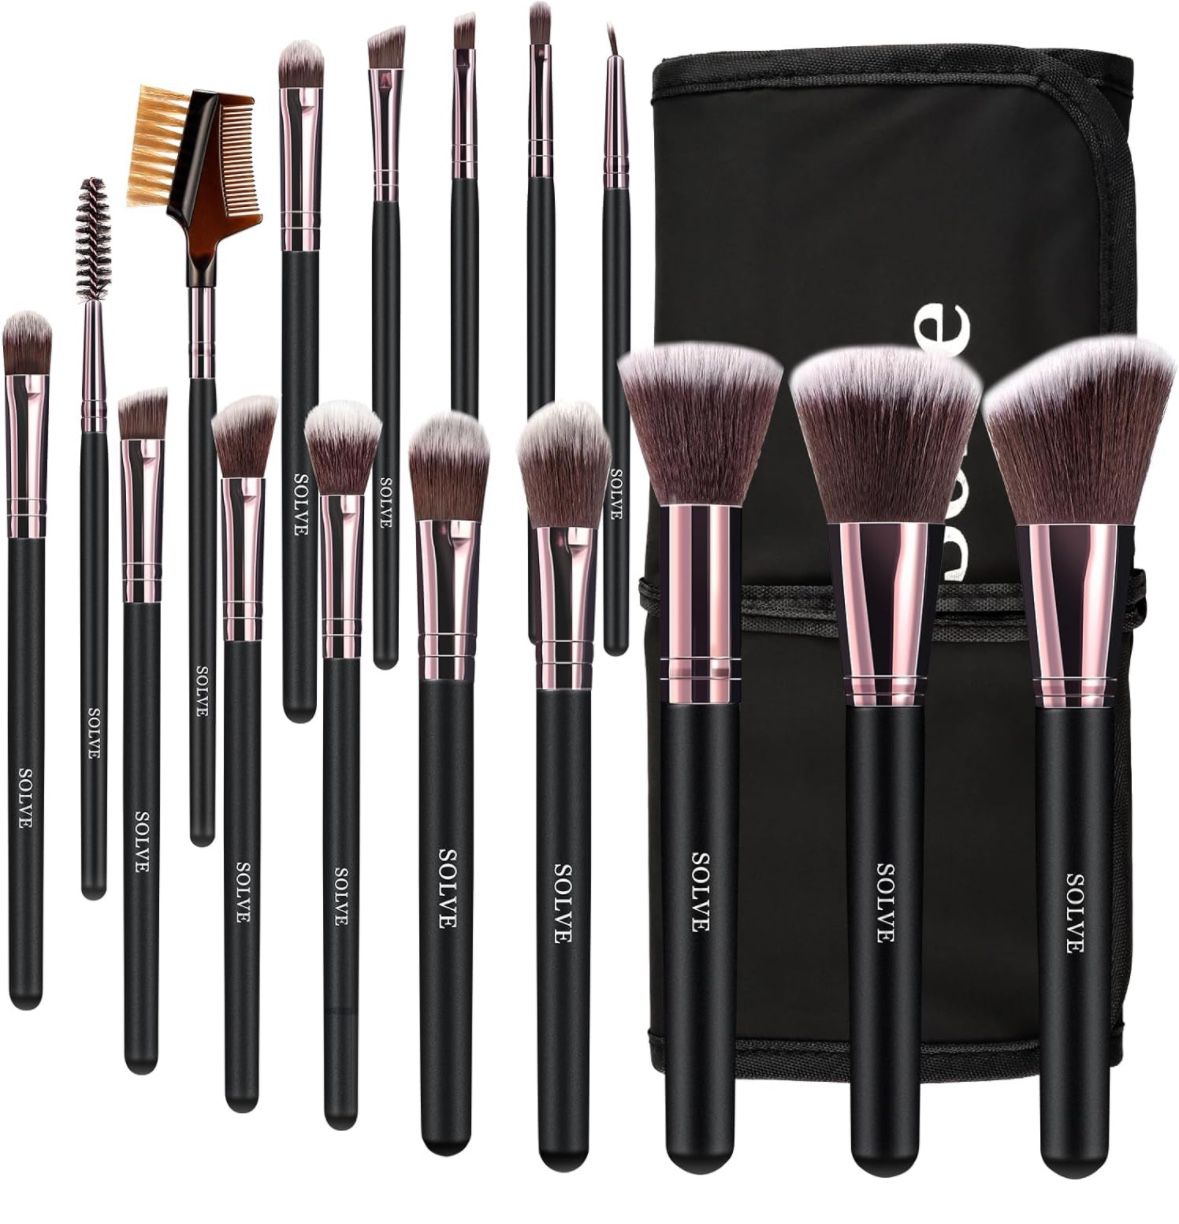 Makeup Brushes Professional 16pcs Brushes Set with wooded handle, case included, Rose gold